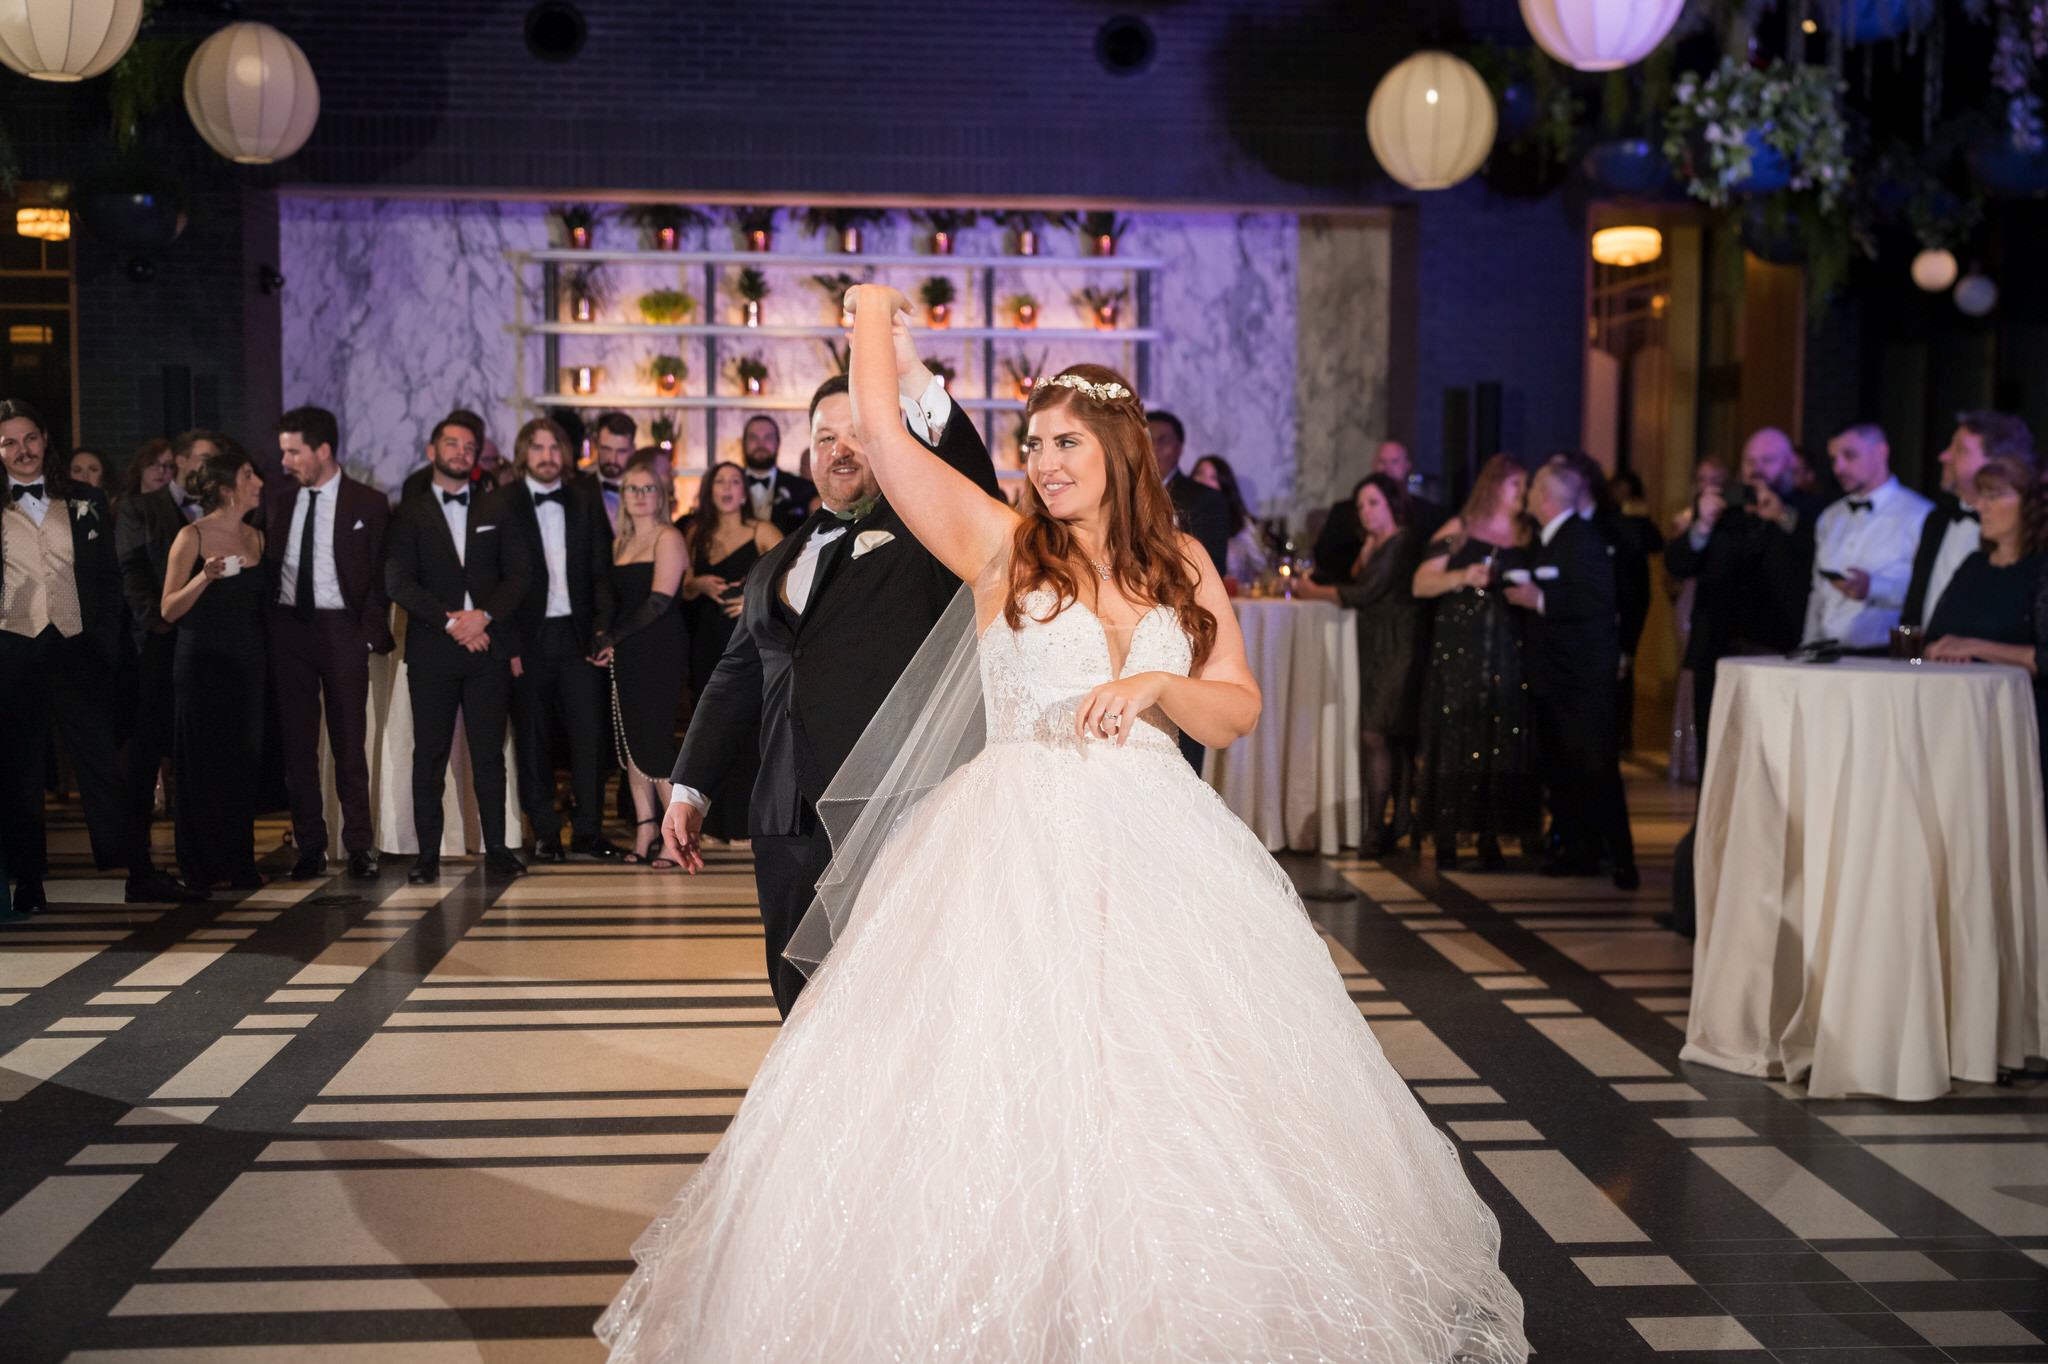 Accented with purple uplighting, a bride and groom share a first dance at their Shinola Hotel wedding reception.